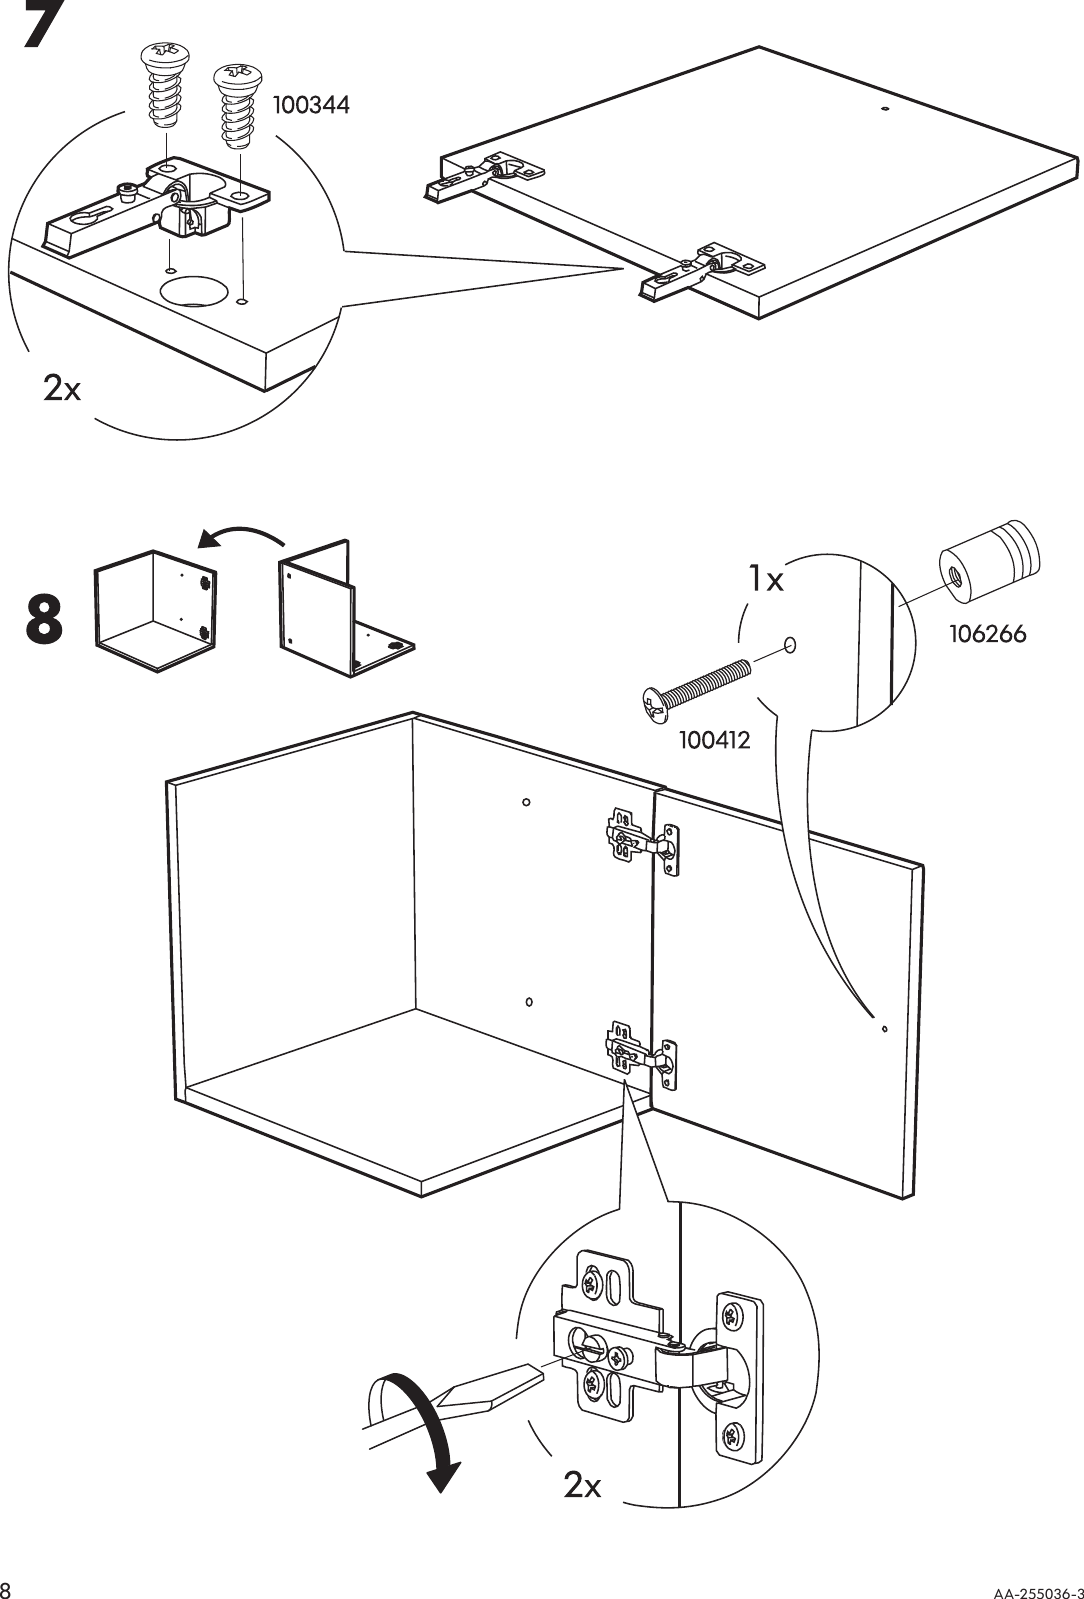 Page 8 of 12 - Ikea Ikea-Expedit-Insert-Door-13X13-Assembly-Instruction